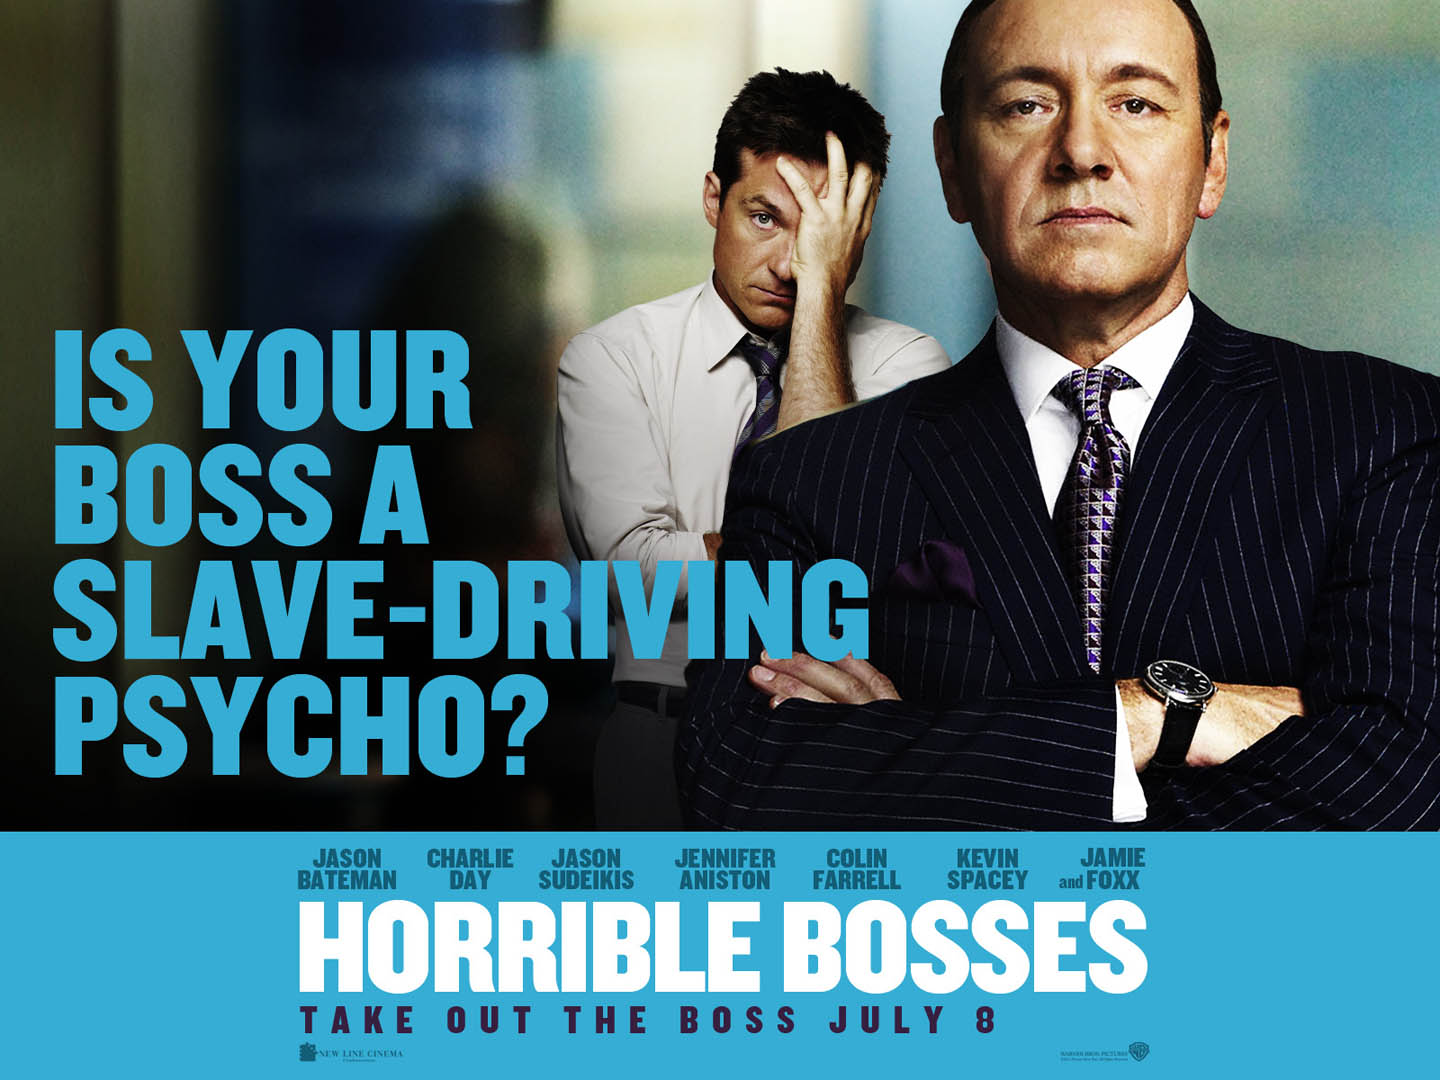 Comedy Kevin Spacey In Horrible Bosses